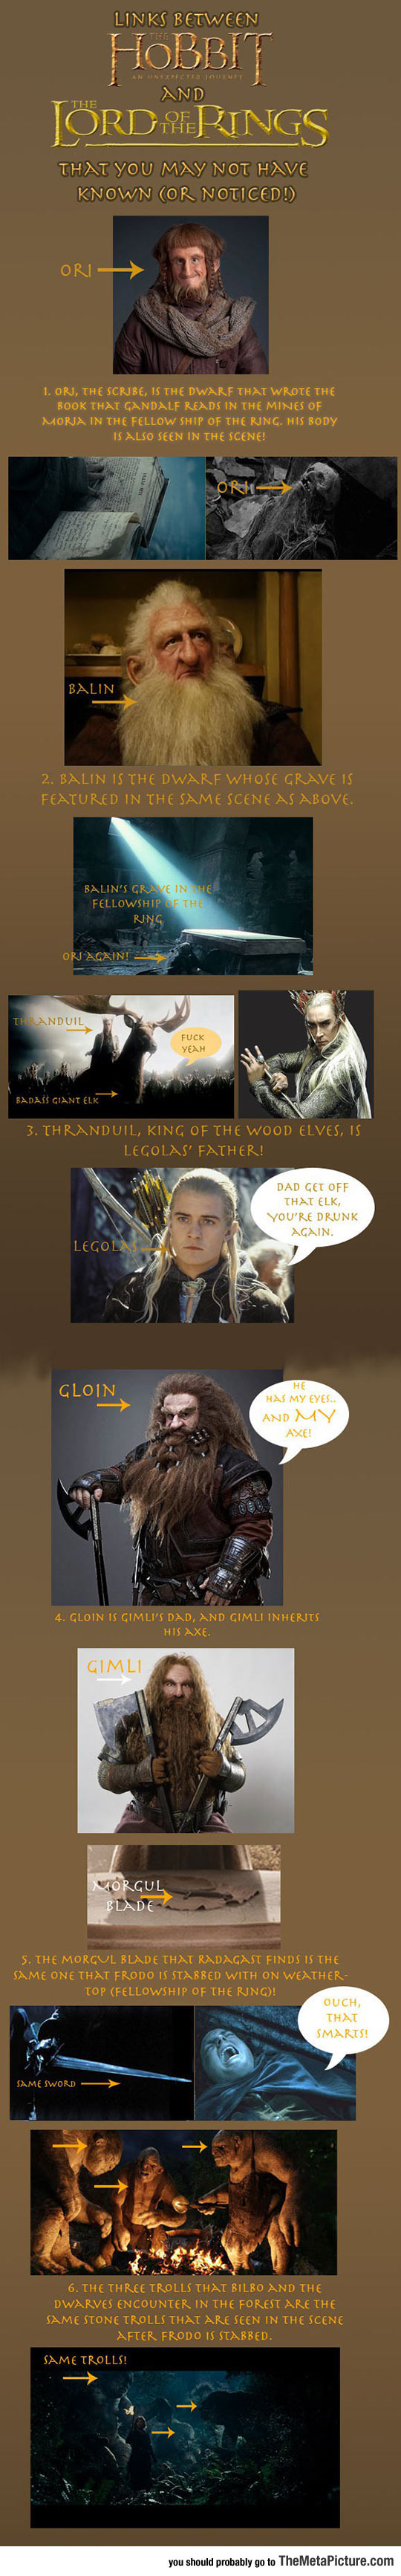 Some Links Between The Hobbit And The Lord Of The Rings